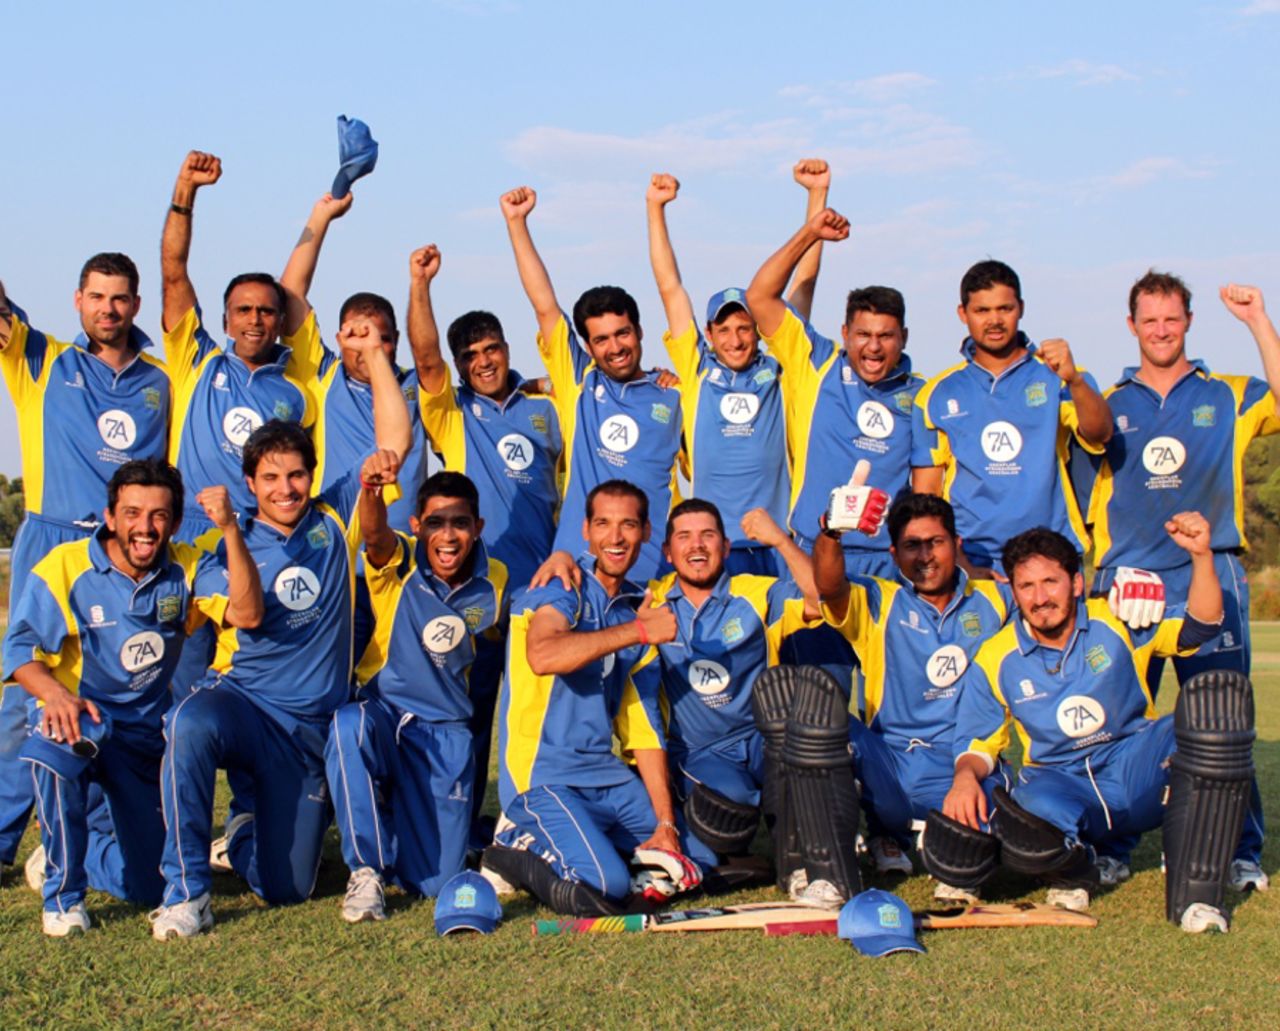 Sweden celebrate their win over Spain and their subsequent promotion to the European Division One, Spain v Sweden, semi-final, European Championship Division Two Twenty20 2012, Corfu, September 7, 2012